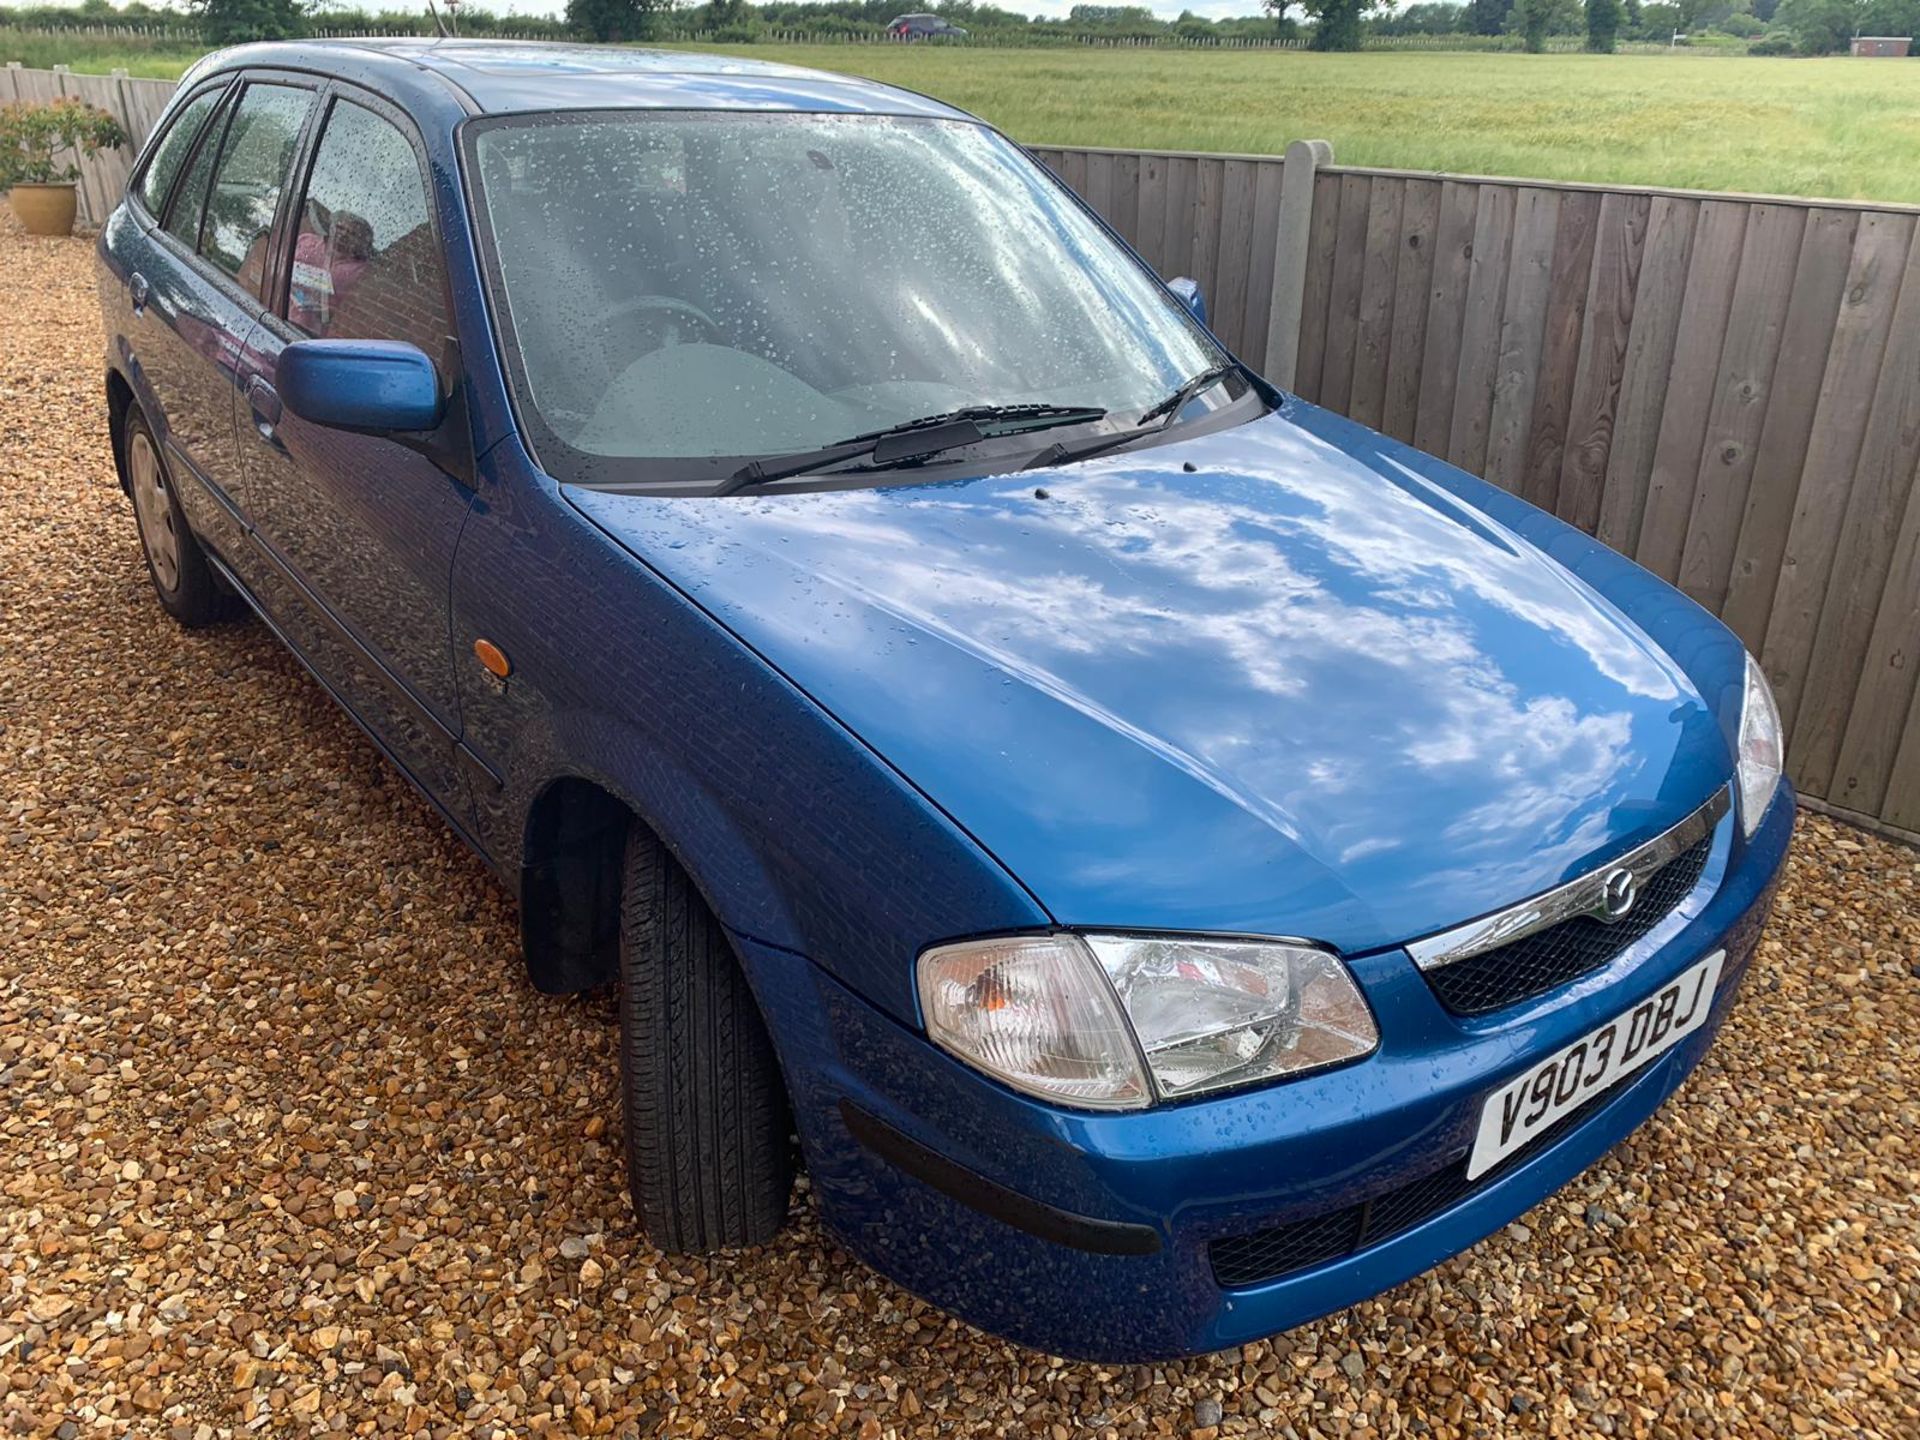 1999 MAZDA 323 GXI 1.5 PETROL 90 HP HATCHBACK, 1 OWNER FROM NEW, LAST SERVICE 38 MILES AGO *NO VAT*